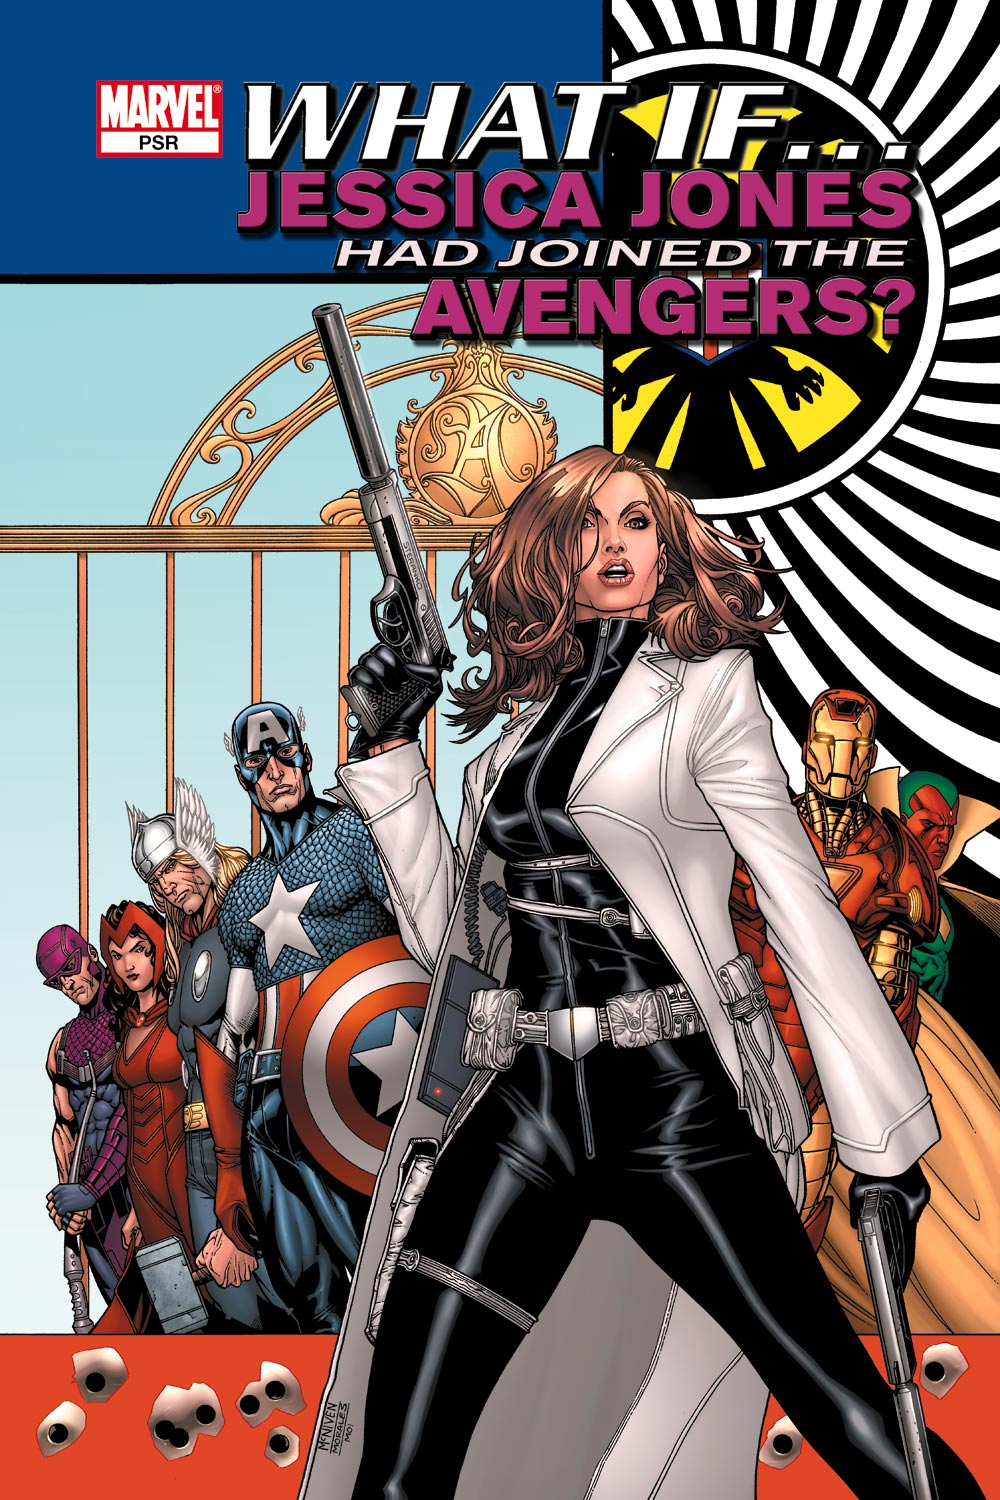 Read online What If Jessica Jones Had Joined the Avengers? comic -  Issue # Full - 1